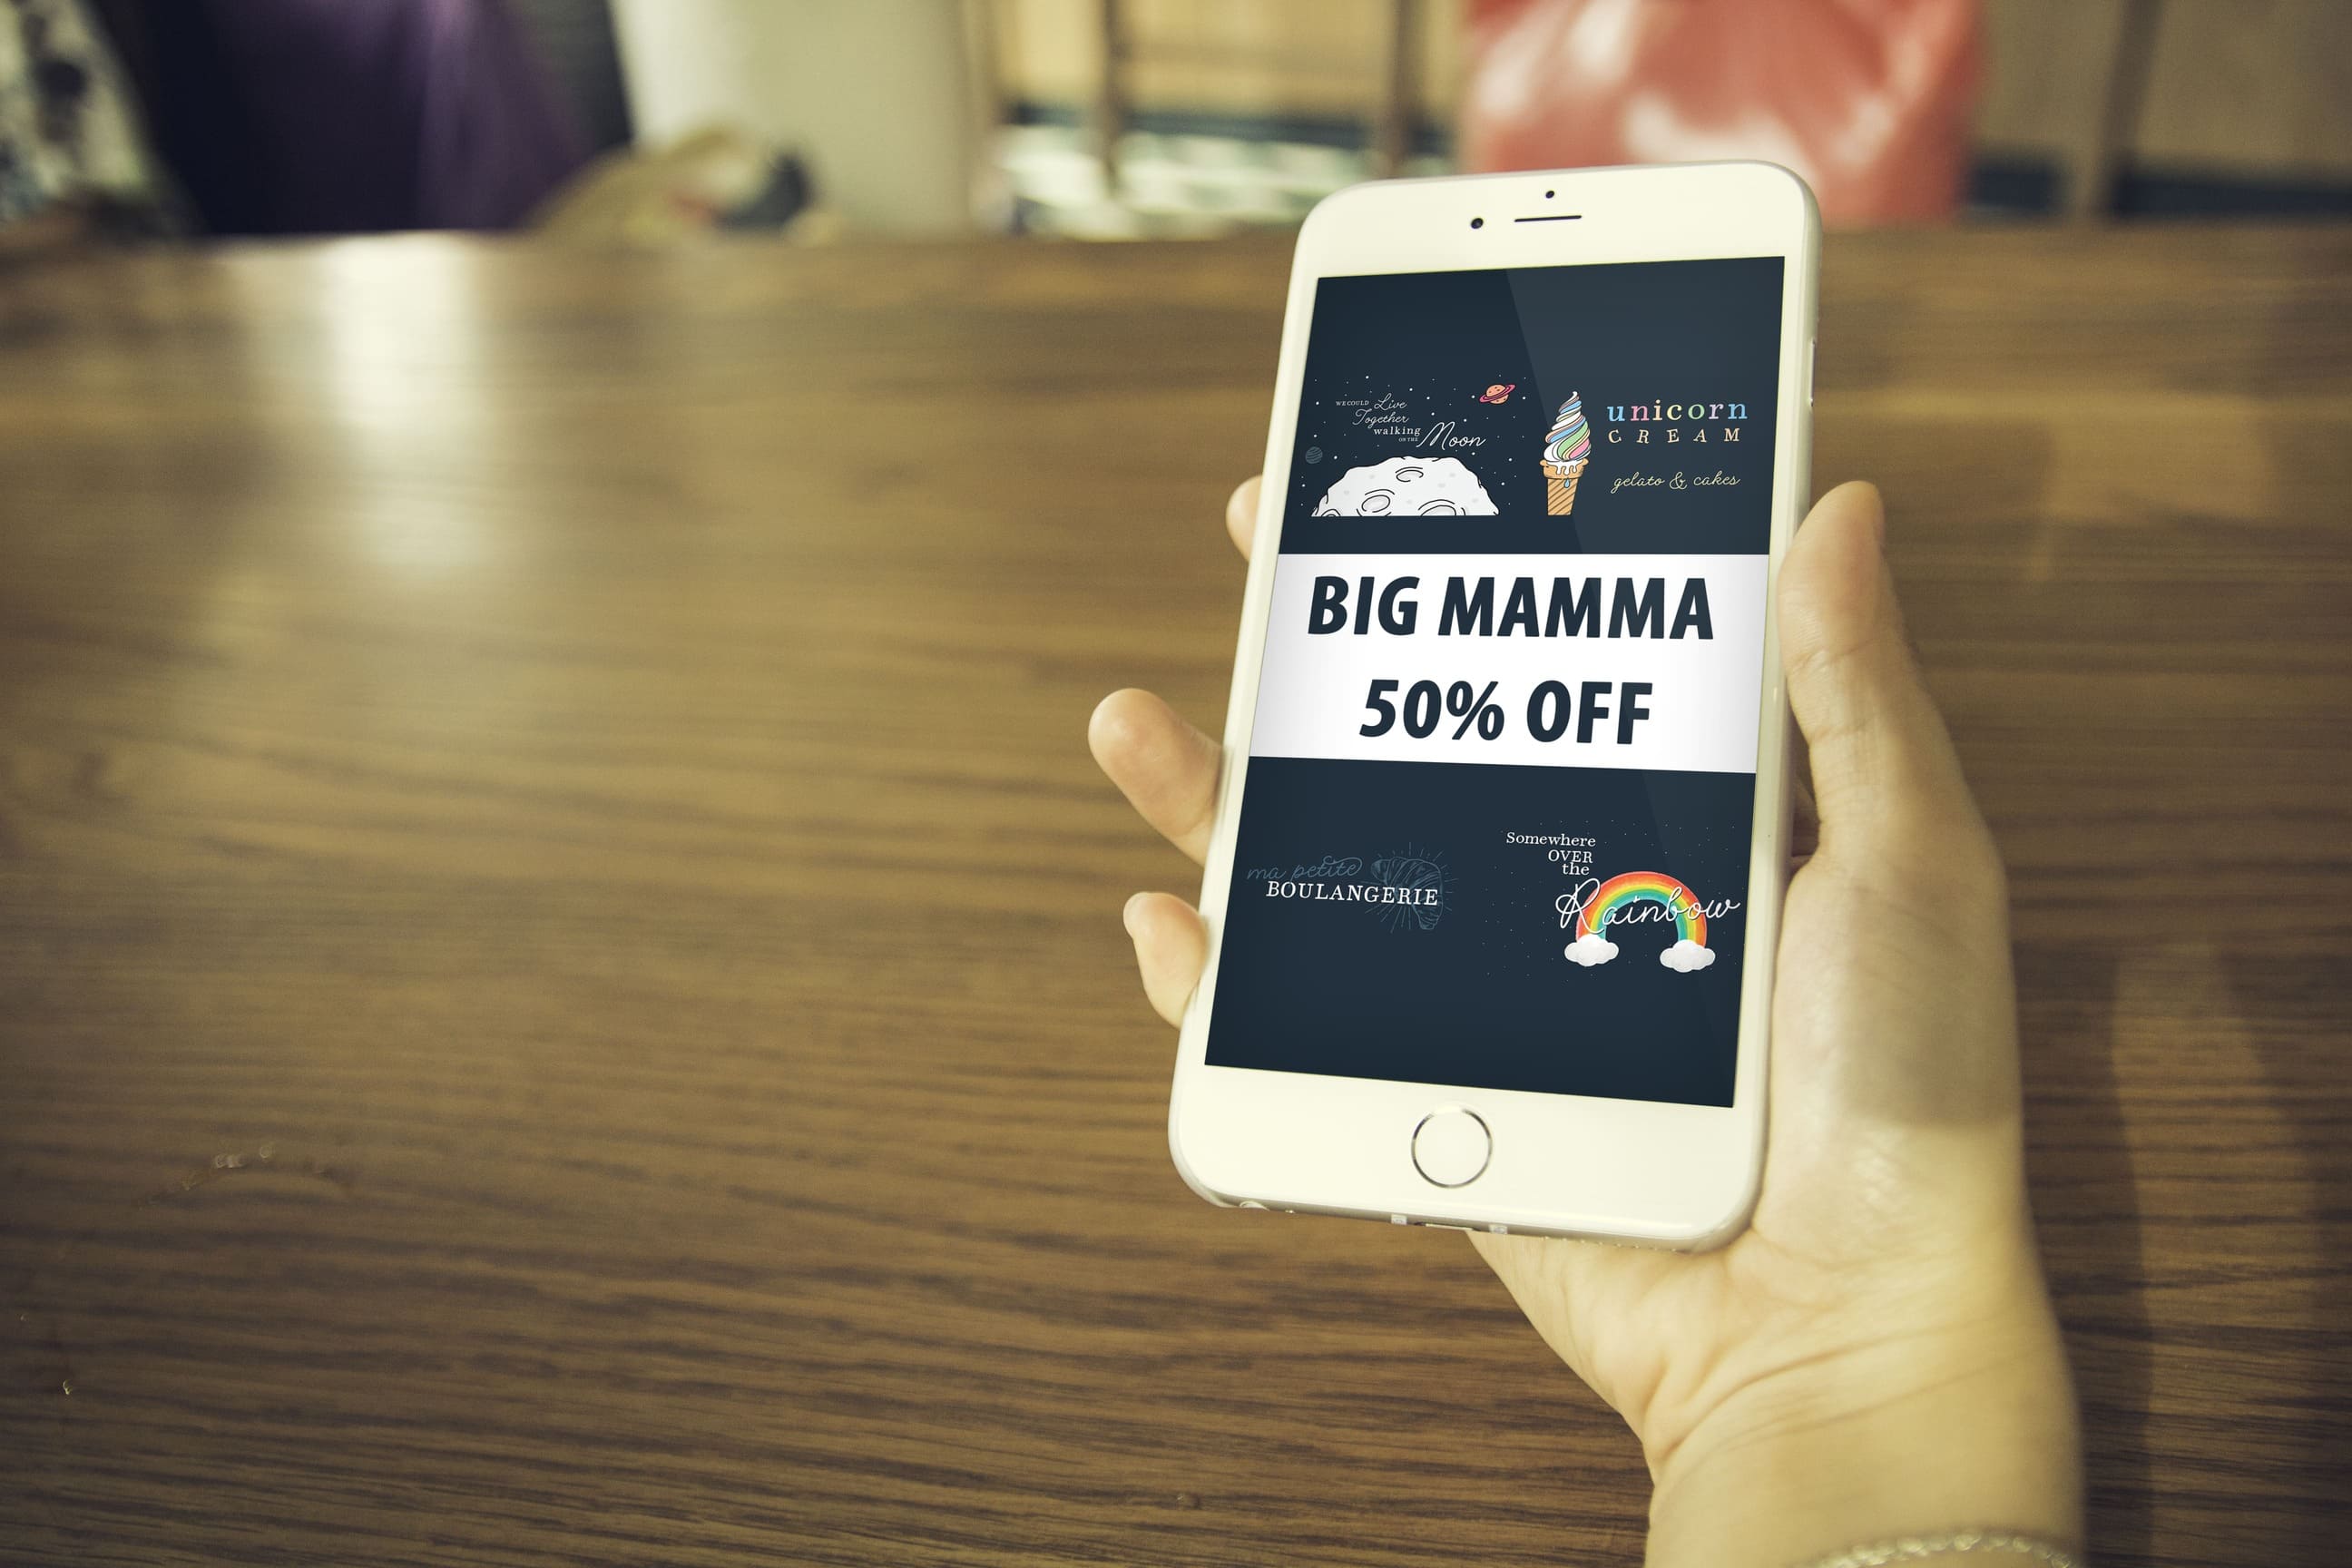 Big Mamma Font Preview On The Phone.